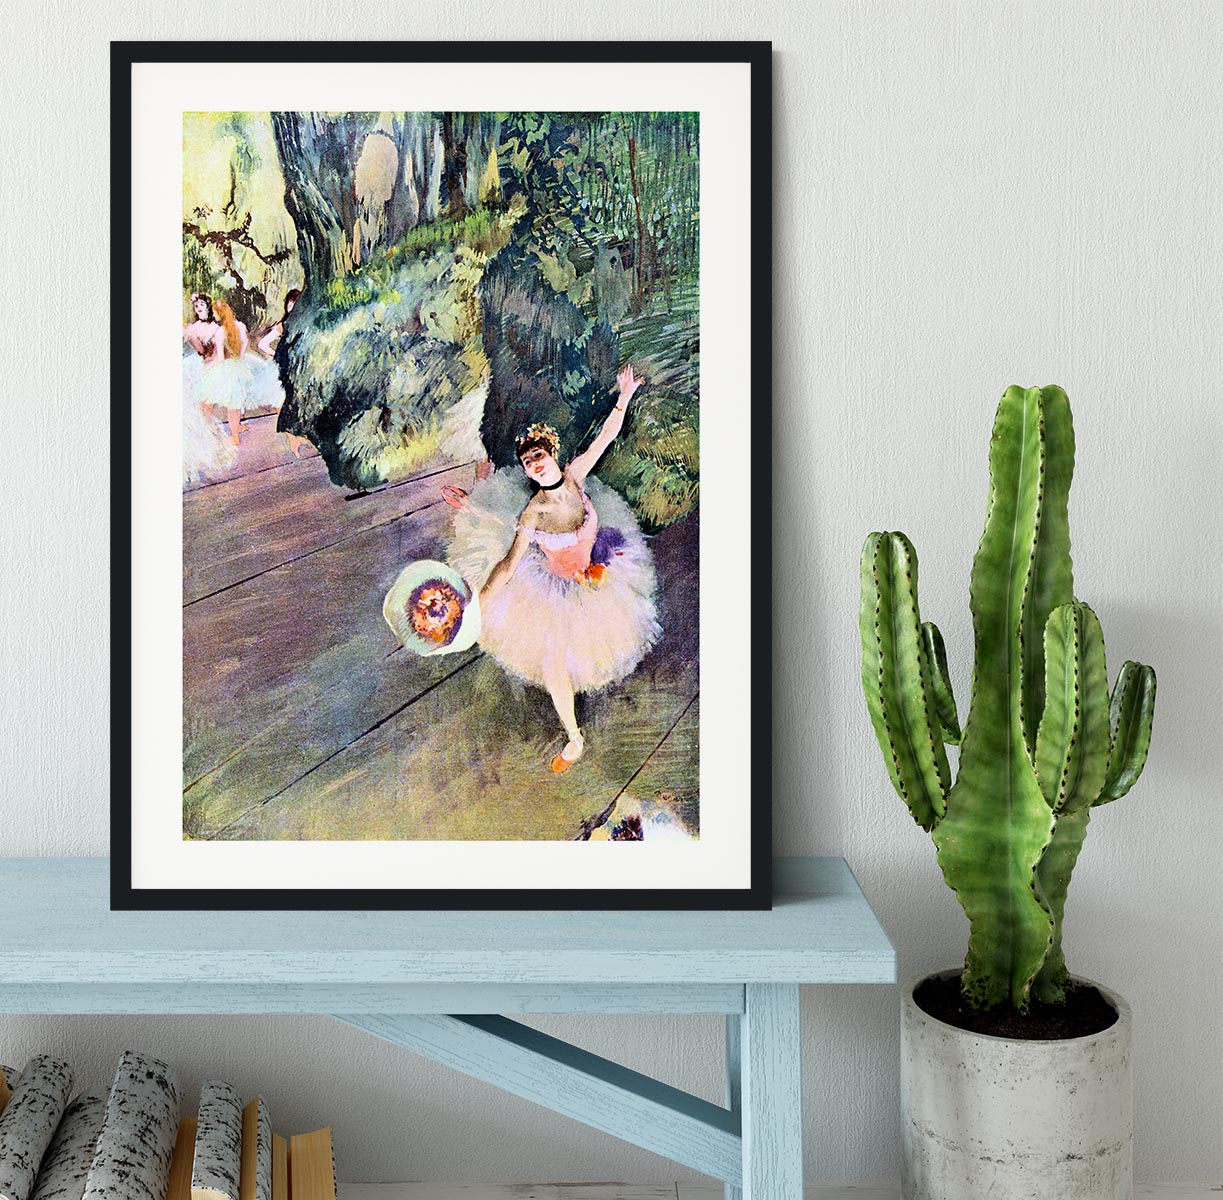 Dancer with a bouquet of flowers The Star of the ballet by Degas Framed Print - Canvas Art Rocks - 1